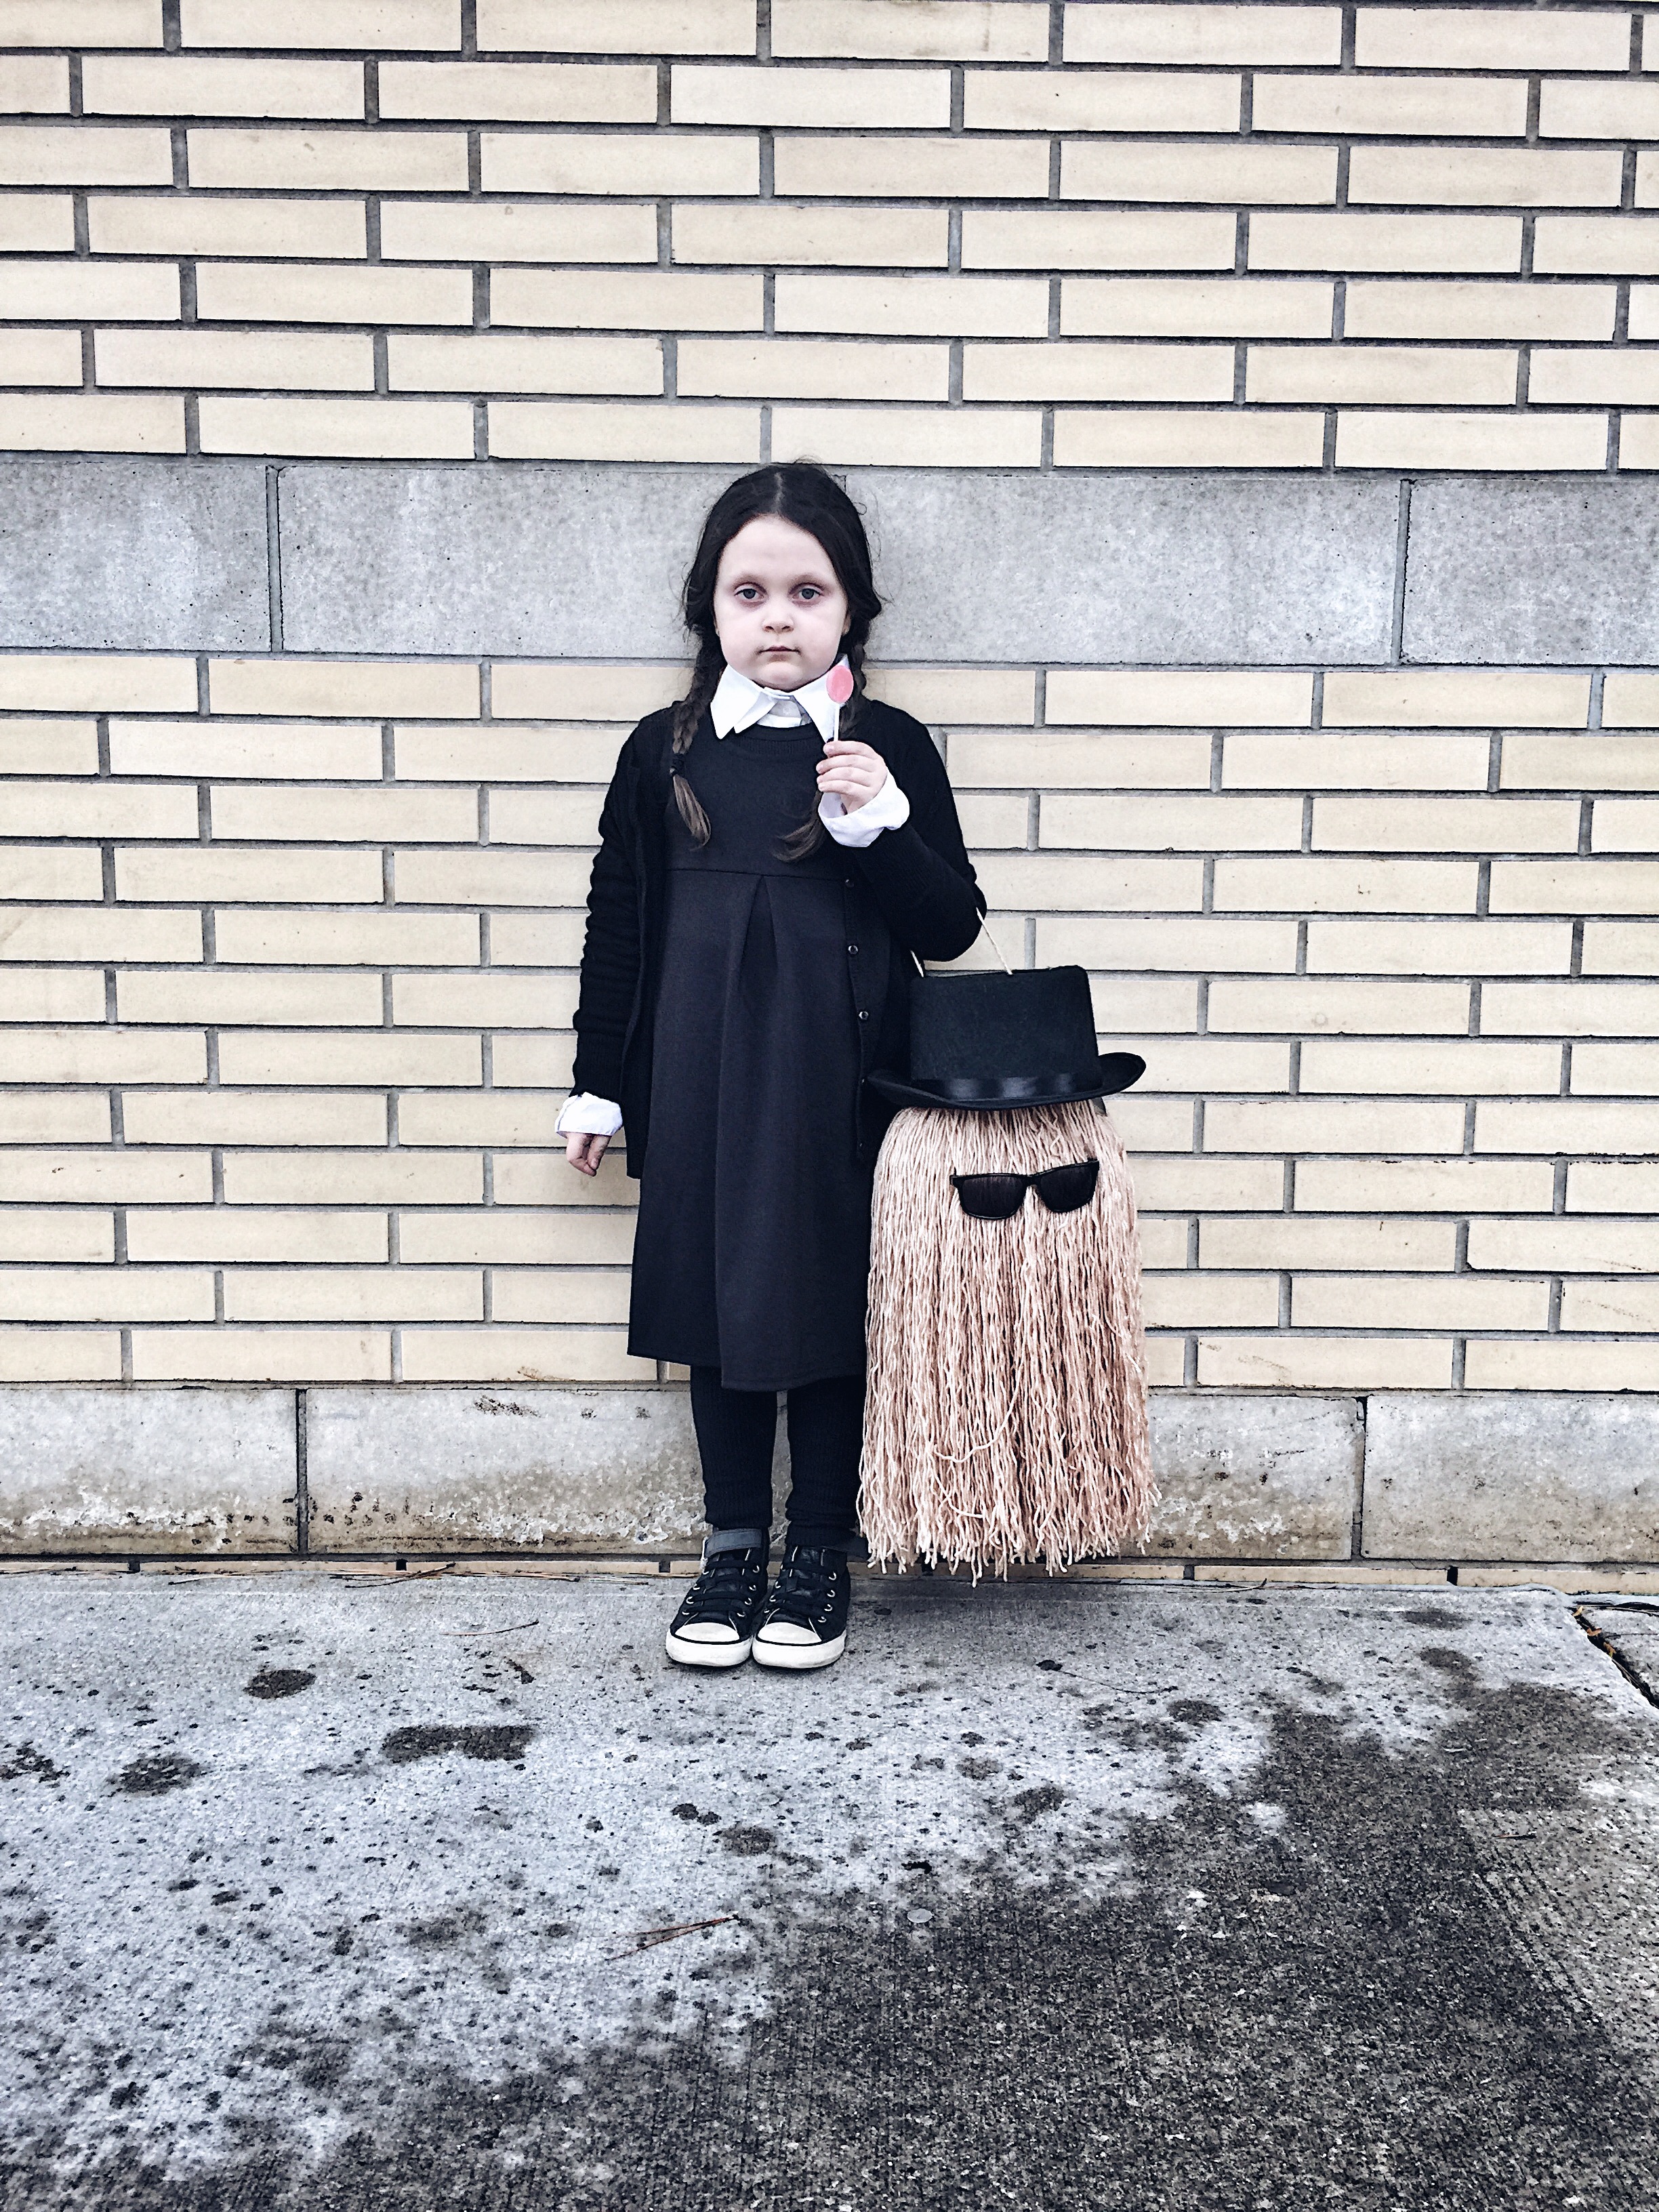 Kids Wednesday Addams and Cousin It Halloween costume | diy Halloween costume | livelovesara | halloween costume | wednesday addams | Kids Halloween Costume | Addams Family Costume